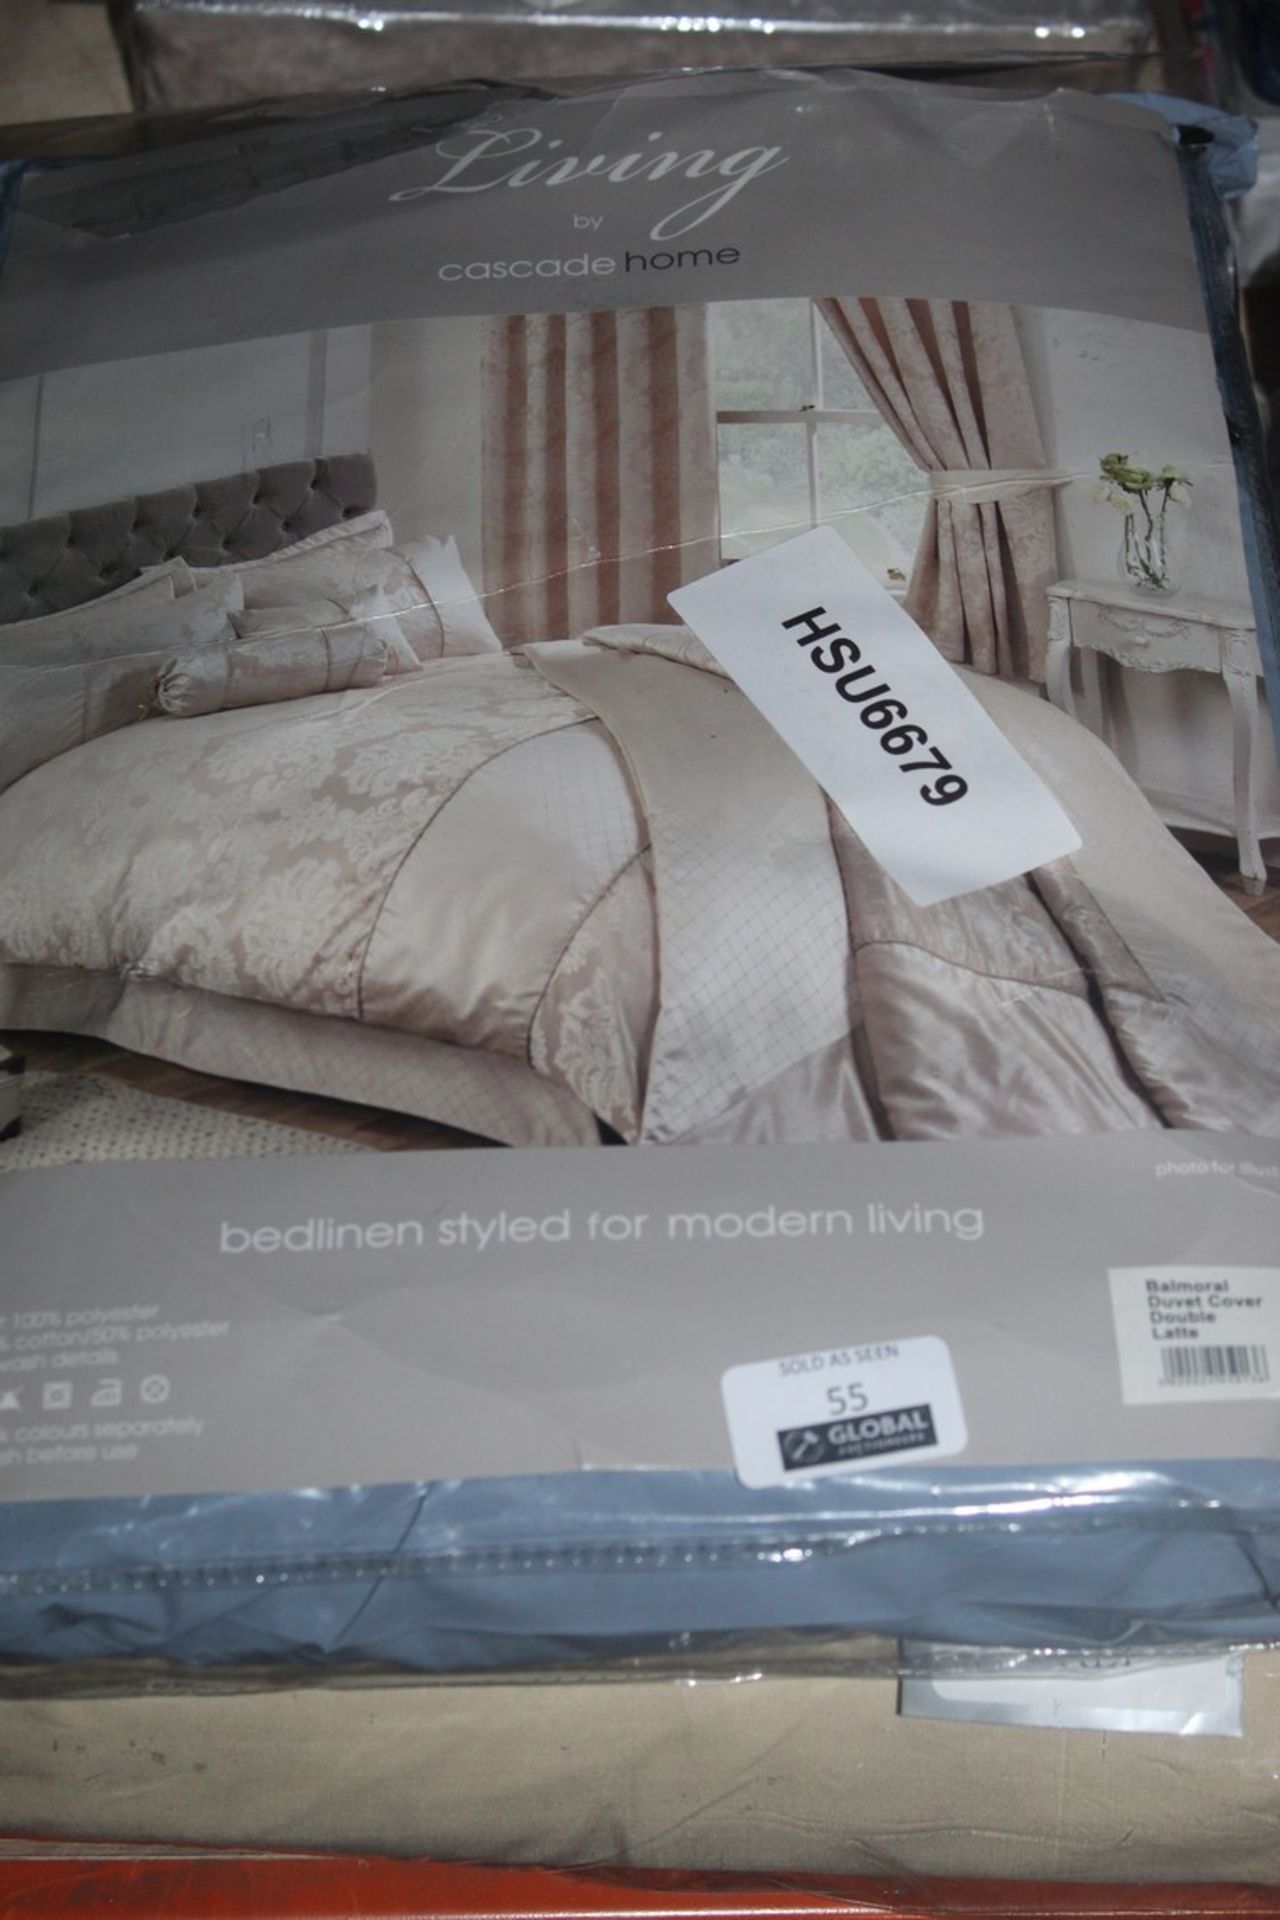 Assorted Bedding Sets to Include Belledorme Divan Base Wraps in Crushed Velvet, Living By Cascade